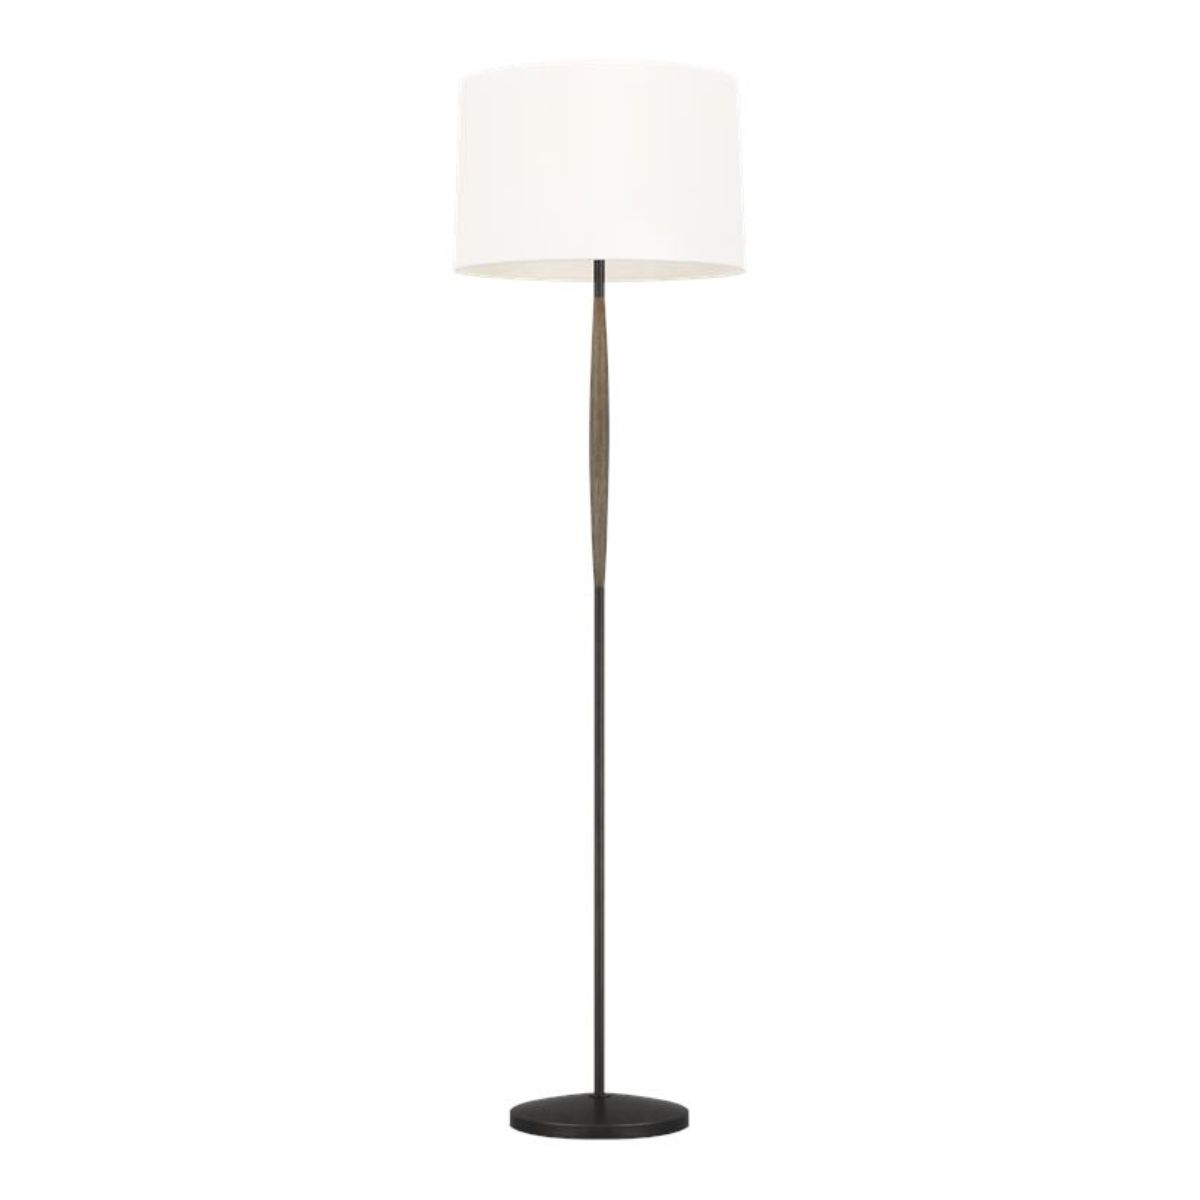 Ferrelli Floor Lamp Aged Pewter Metal with Warm Weathered Oak Wood Accents